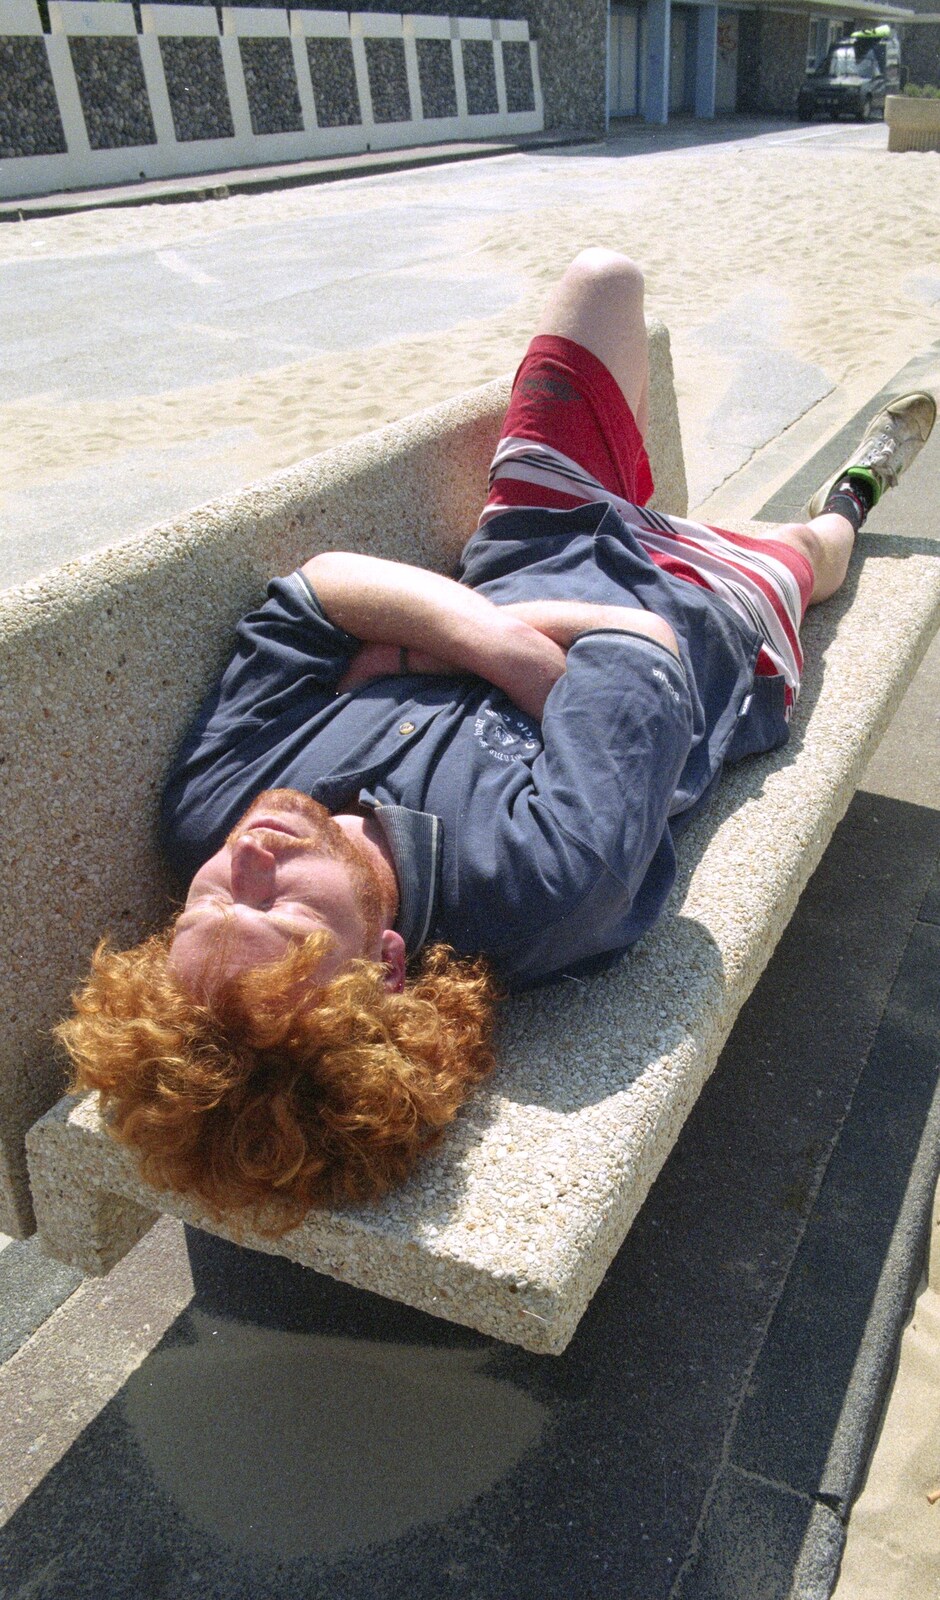 Wavy has a nap from A BSCC Bike Ride to Gravelines, Pas de Calais, France - 11th May 2000